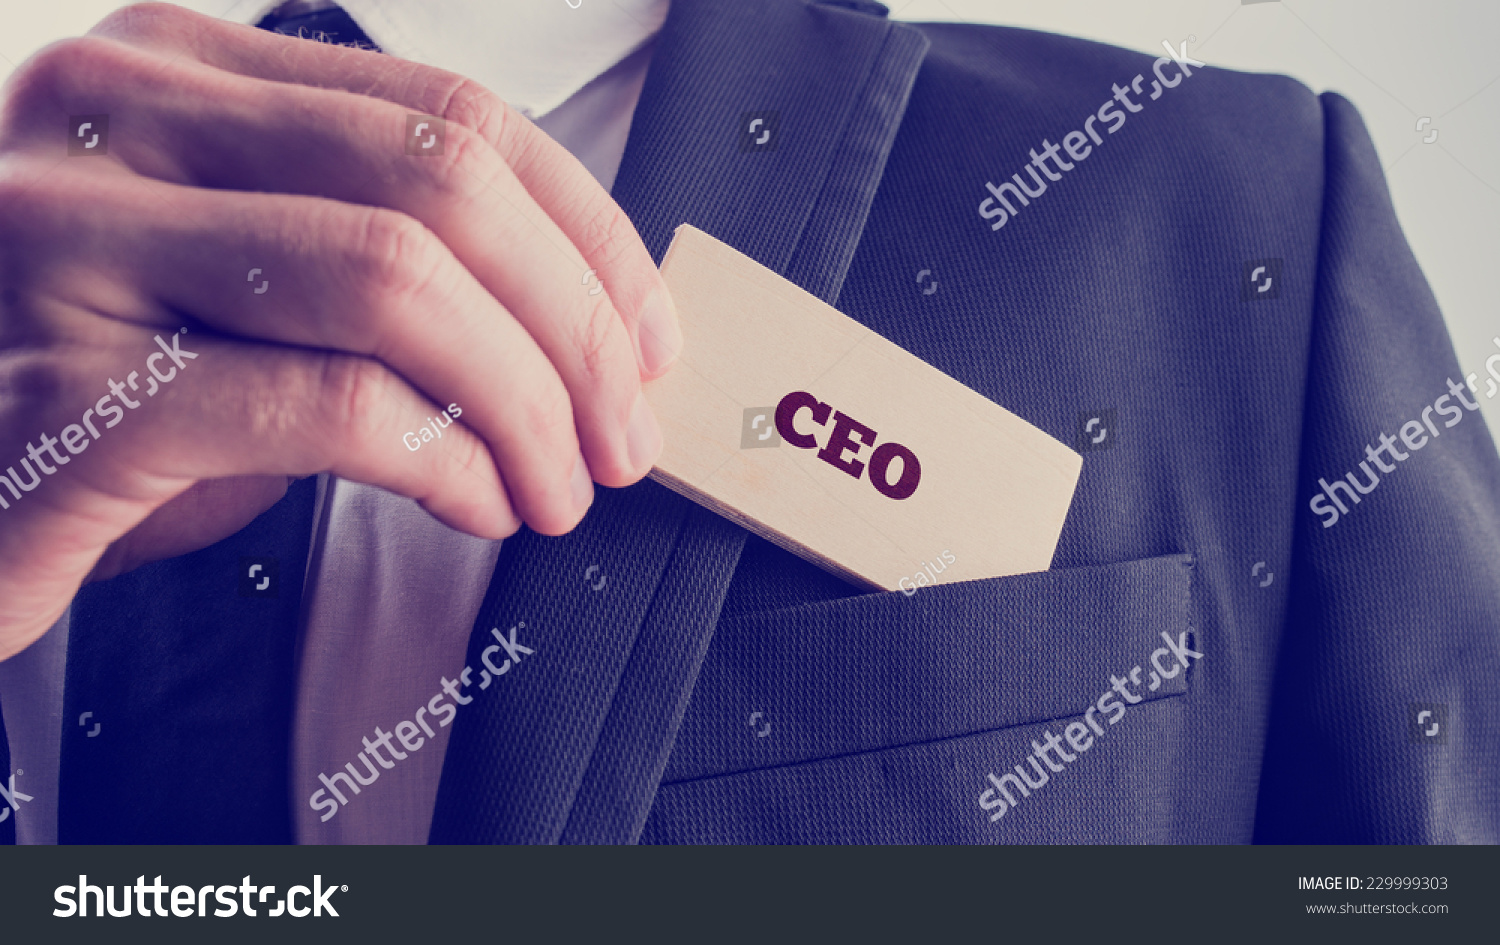 Retro style image of a businessman showing a wooden card reading - CEO - as he withdraws it from the pocket of his suit jacket. #229999303